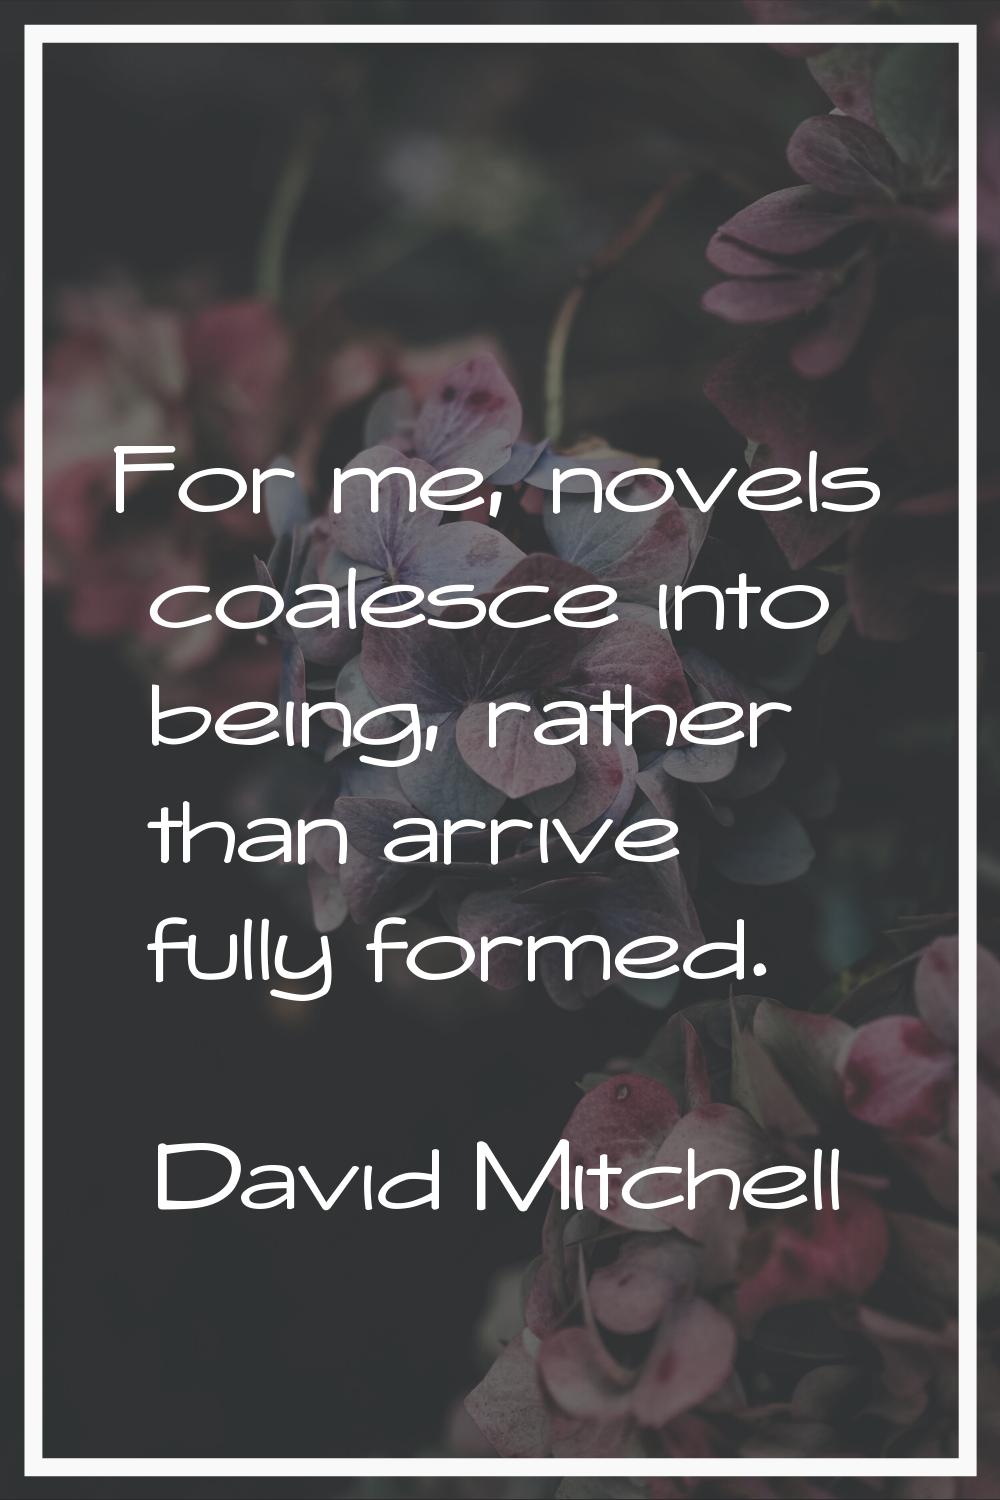 For me, novels coalesce into being, rather than arrive fully formed.